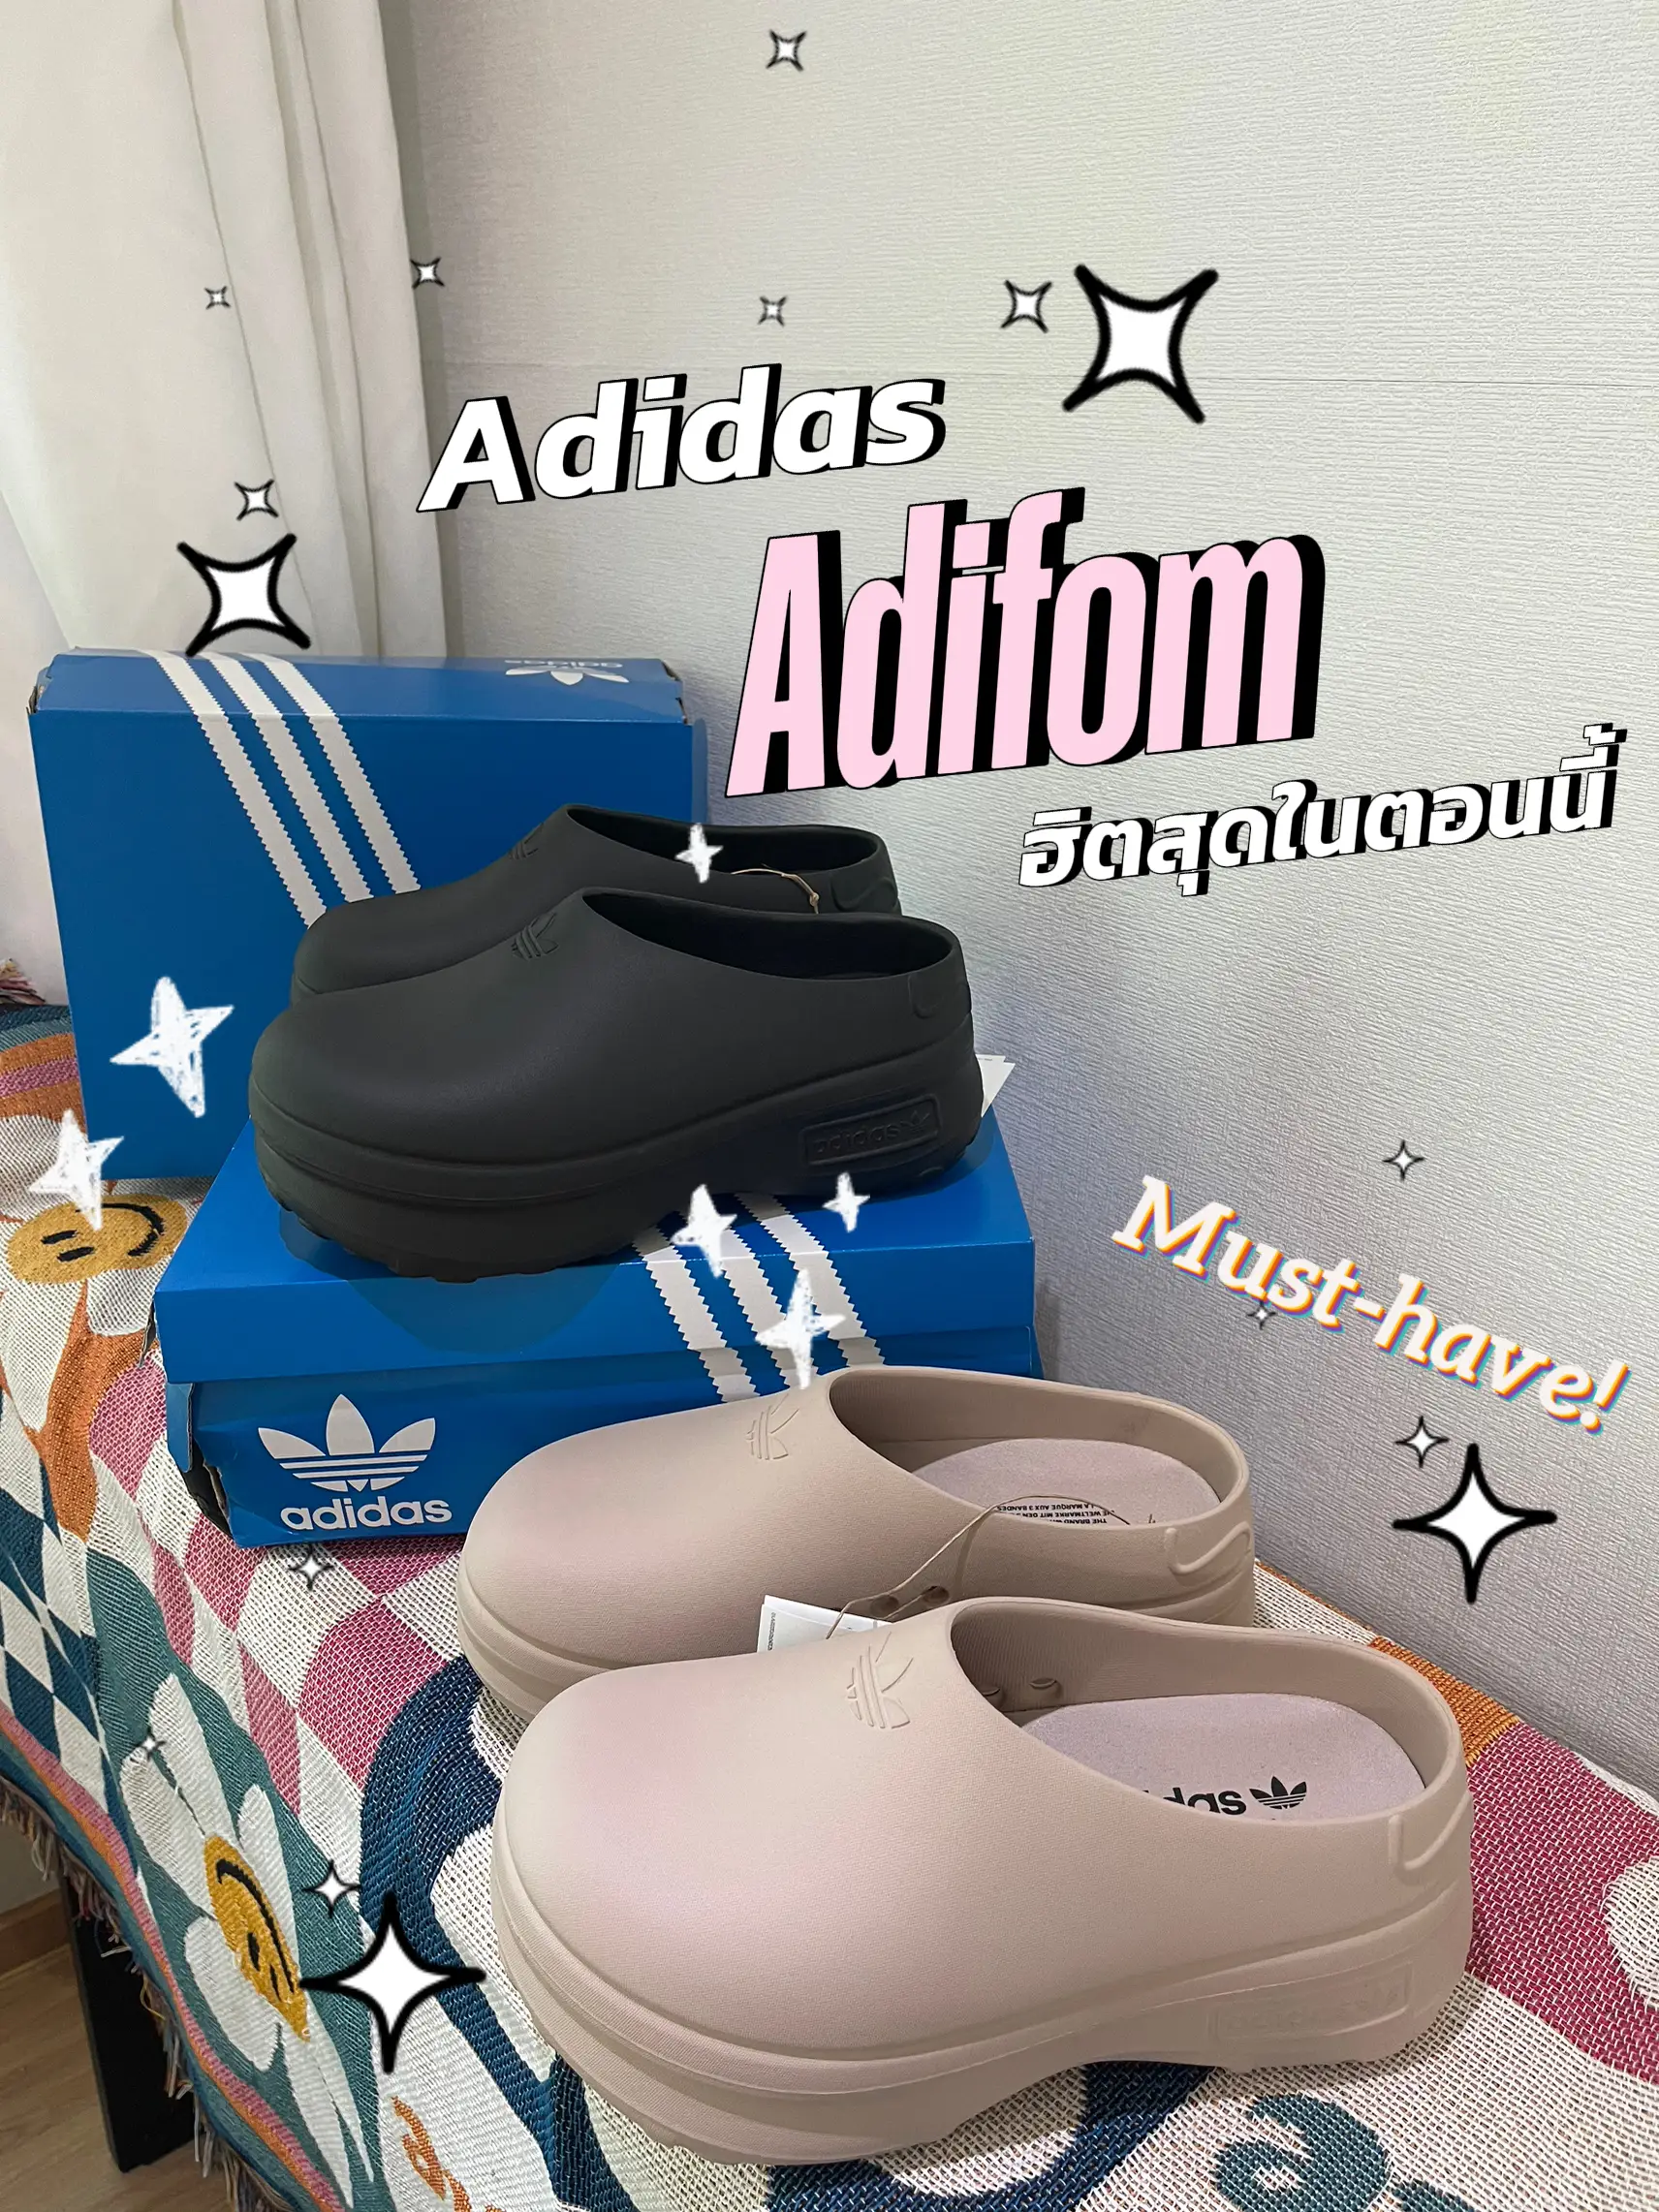 Adidas Adifom Stan Smith Mule ของมันต้องมี 📦 | Gallery posted by